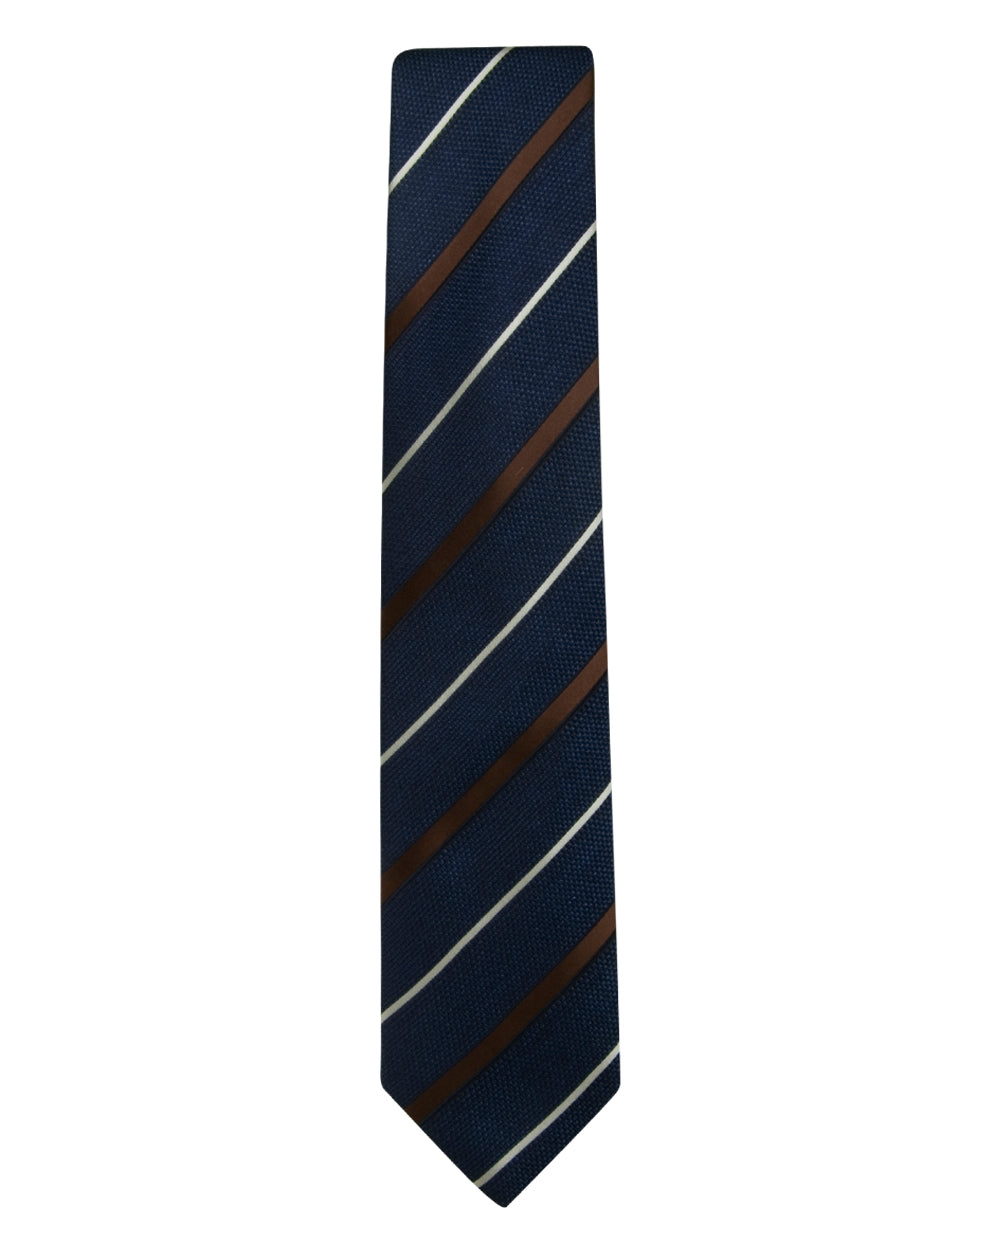 Navy, Brown, and White Stripe Tie